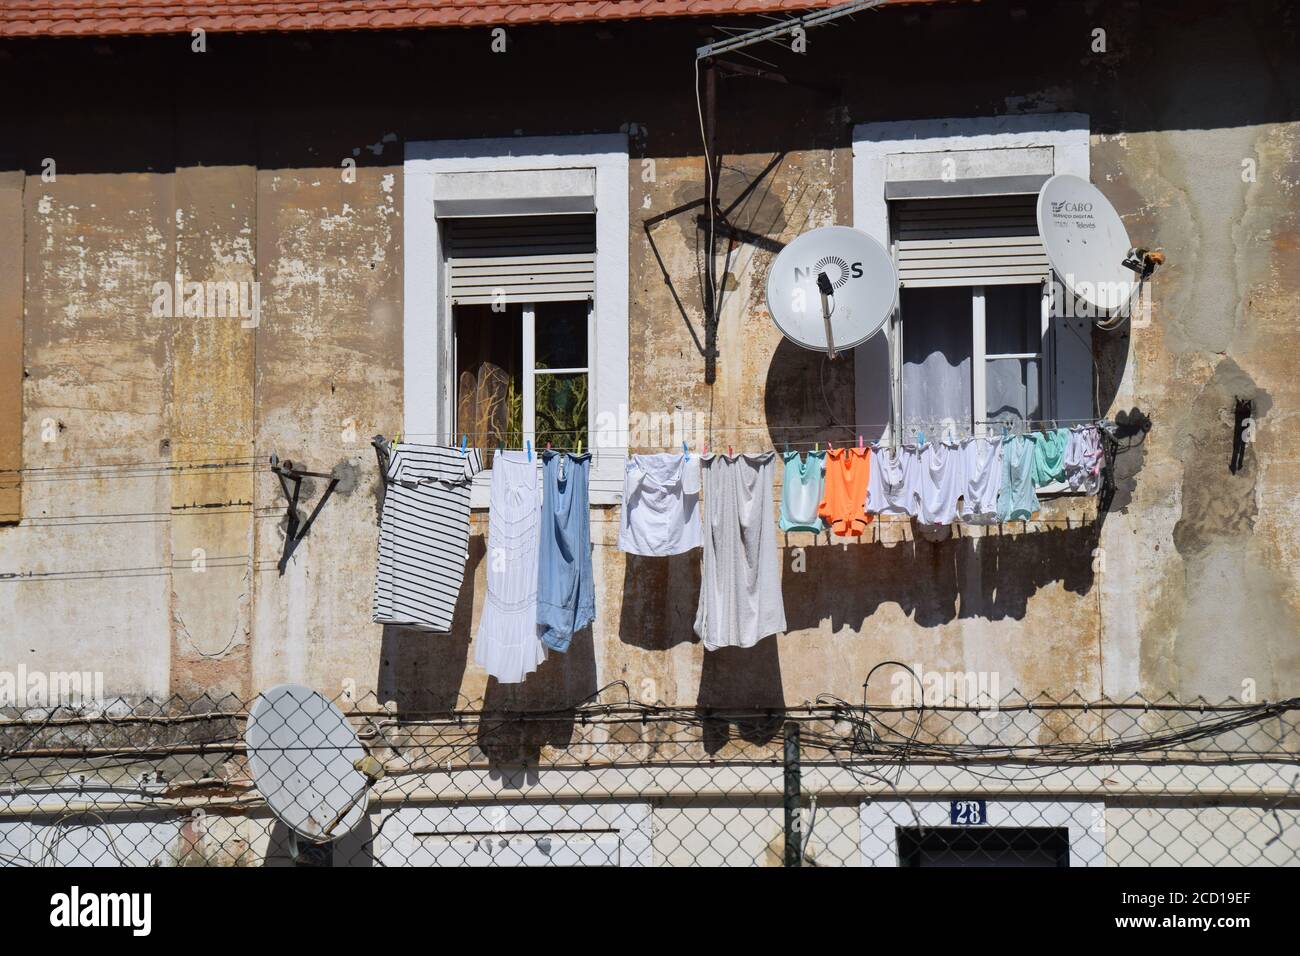 Cloths hanged on window in Lisbon Portugal Stock Photo